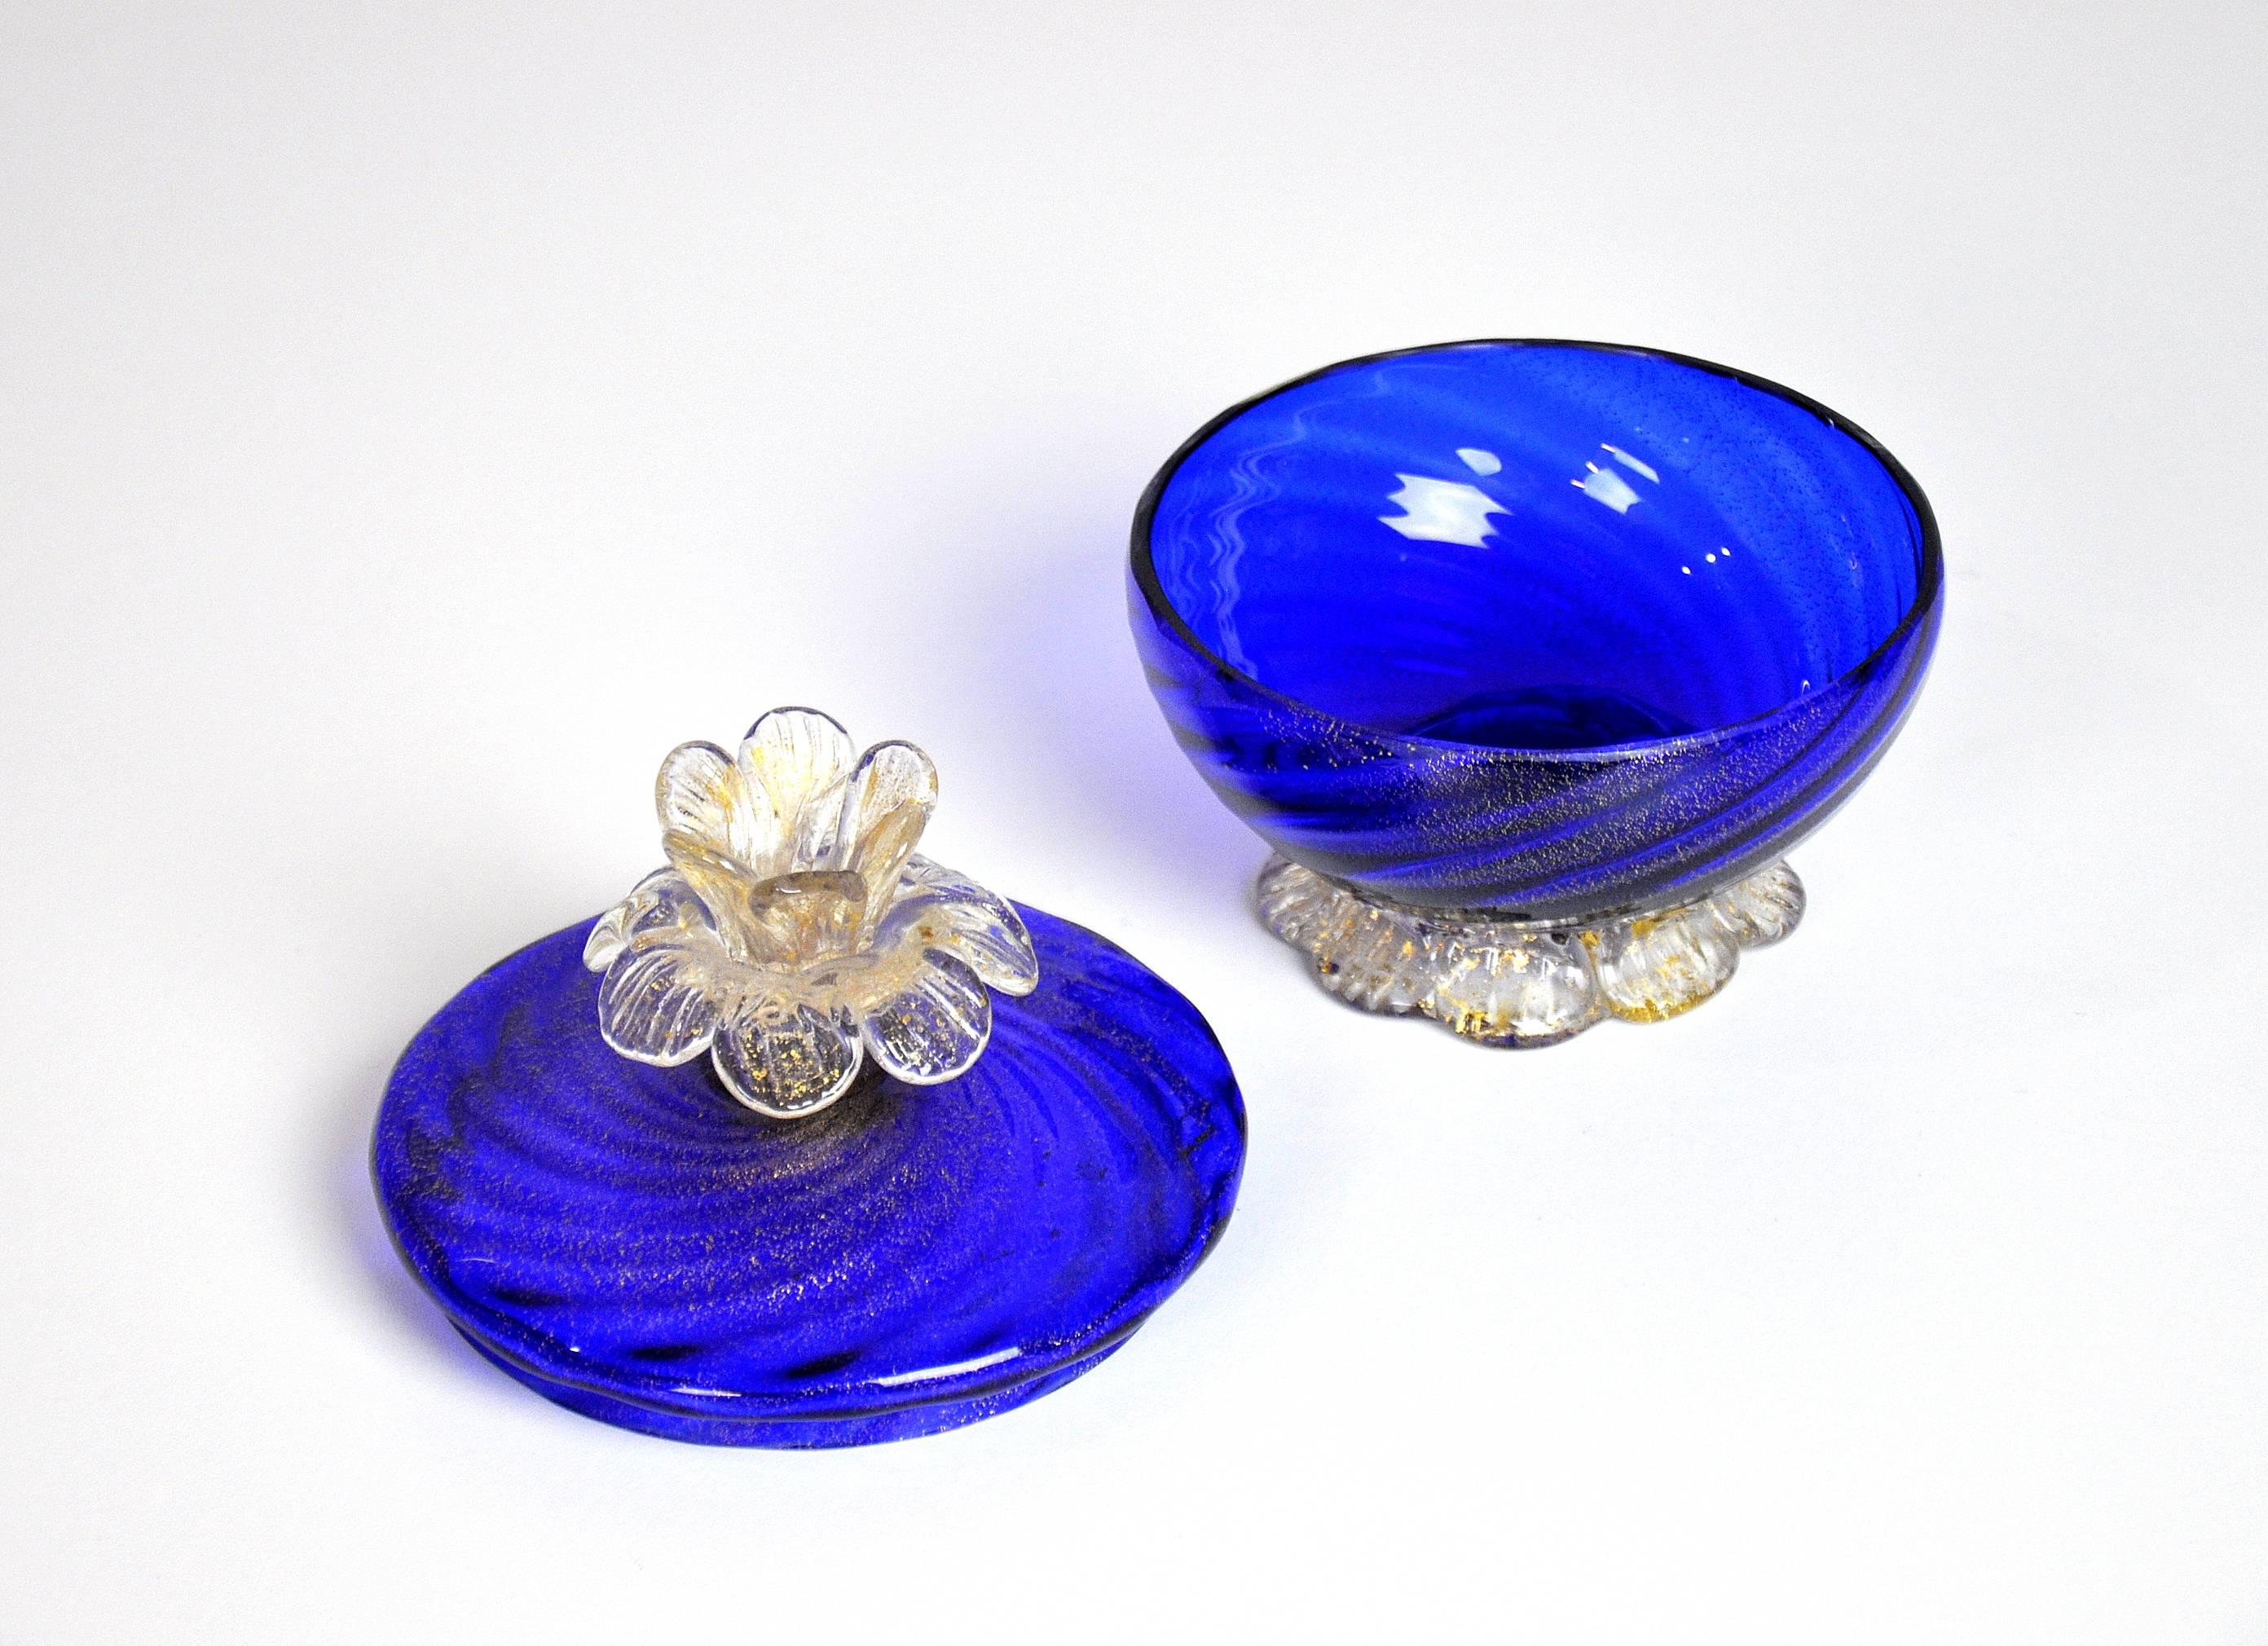 This vintage Venetian handblown art glass covered footed bowl features gold leaf inclusions, a figural finial skillfully shaped like a flower and a petal or leaf shaped base. The jar's deep, rich cobalt blue hue makes for a striking and elegant